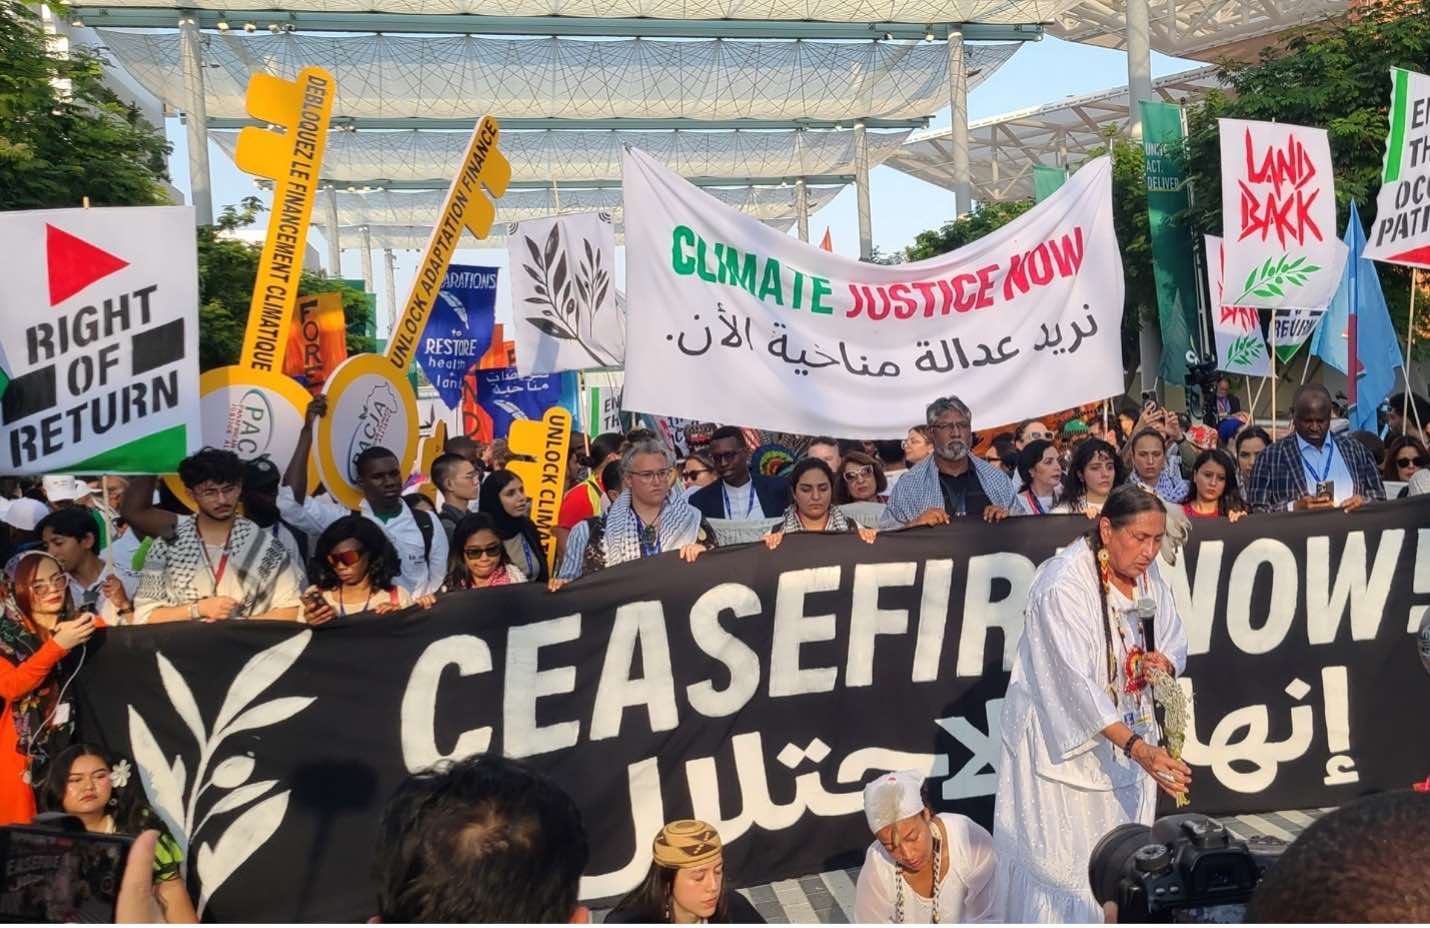 Rows of men and women stand closely, holding signs including "Right of Return" and "Climate Justice Now" in green, red, and black lettering. The group stands behind a black horizontal sign that reads "Ceasefire Now!" in English and Arabic. A woman in white with a plant in one hand and a microphone in the other stands in front of the sign.